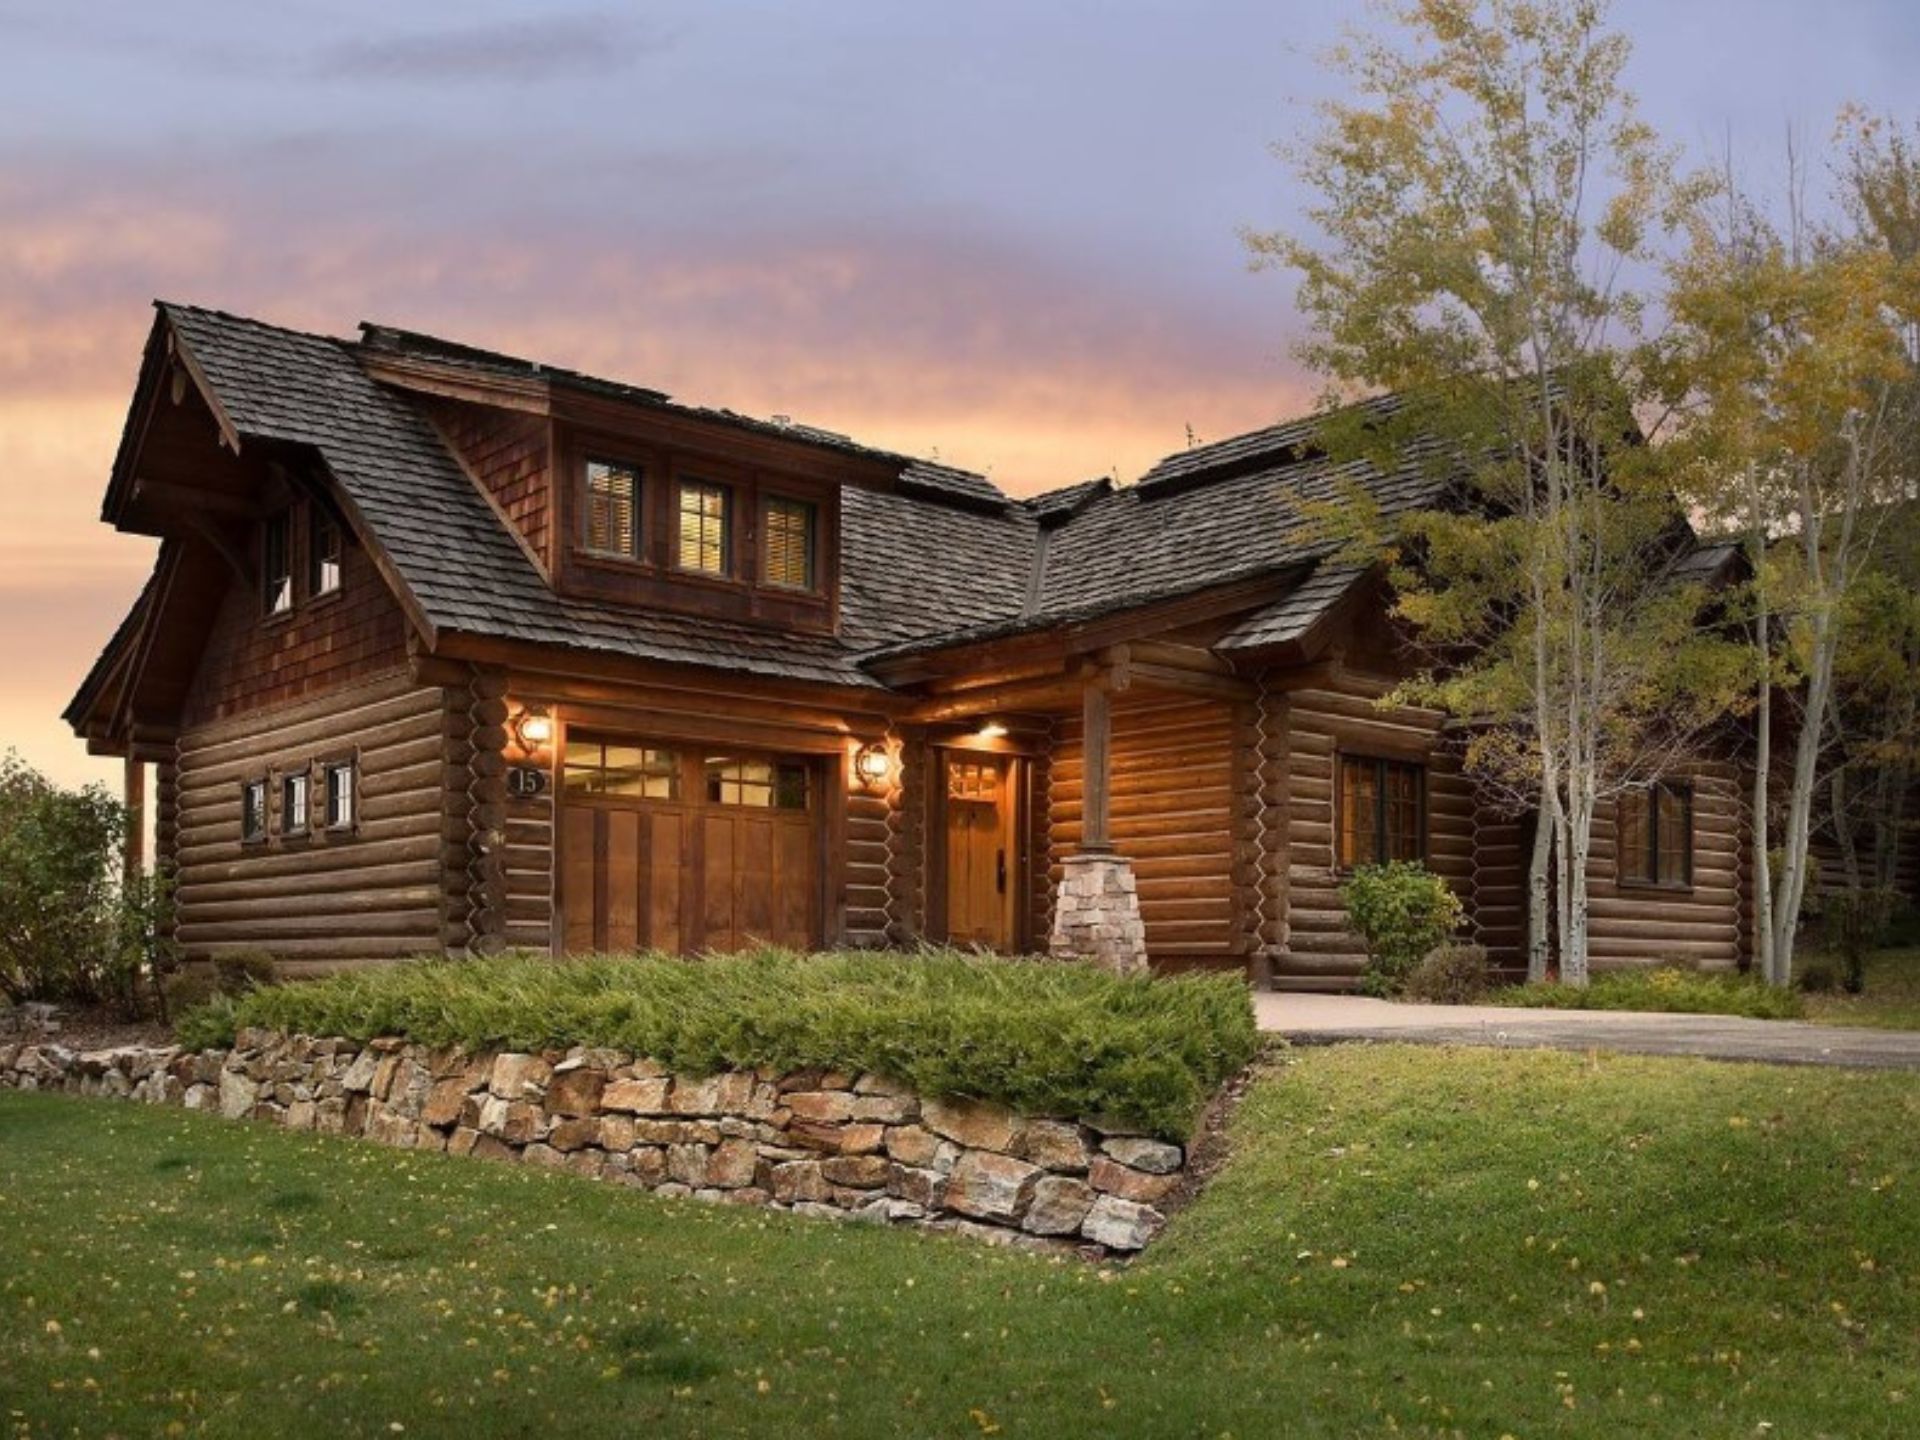 Cozy Cabins And Modern Houses Can Go Hand In Hand And This Place Is The Proof